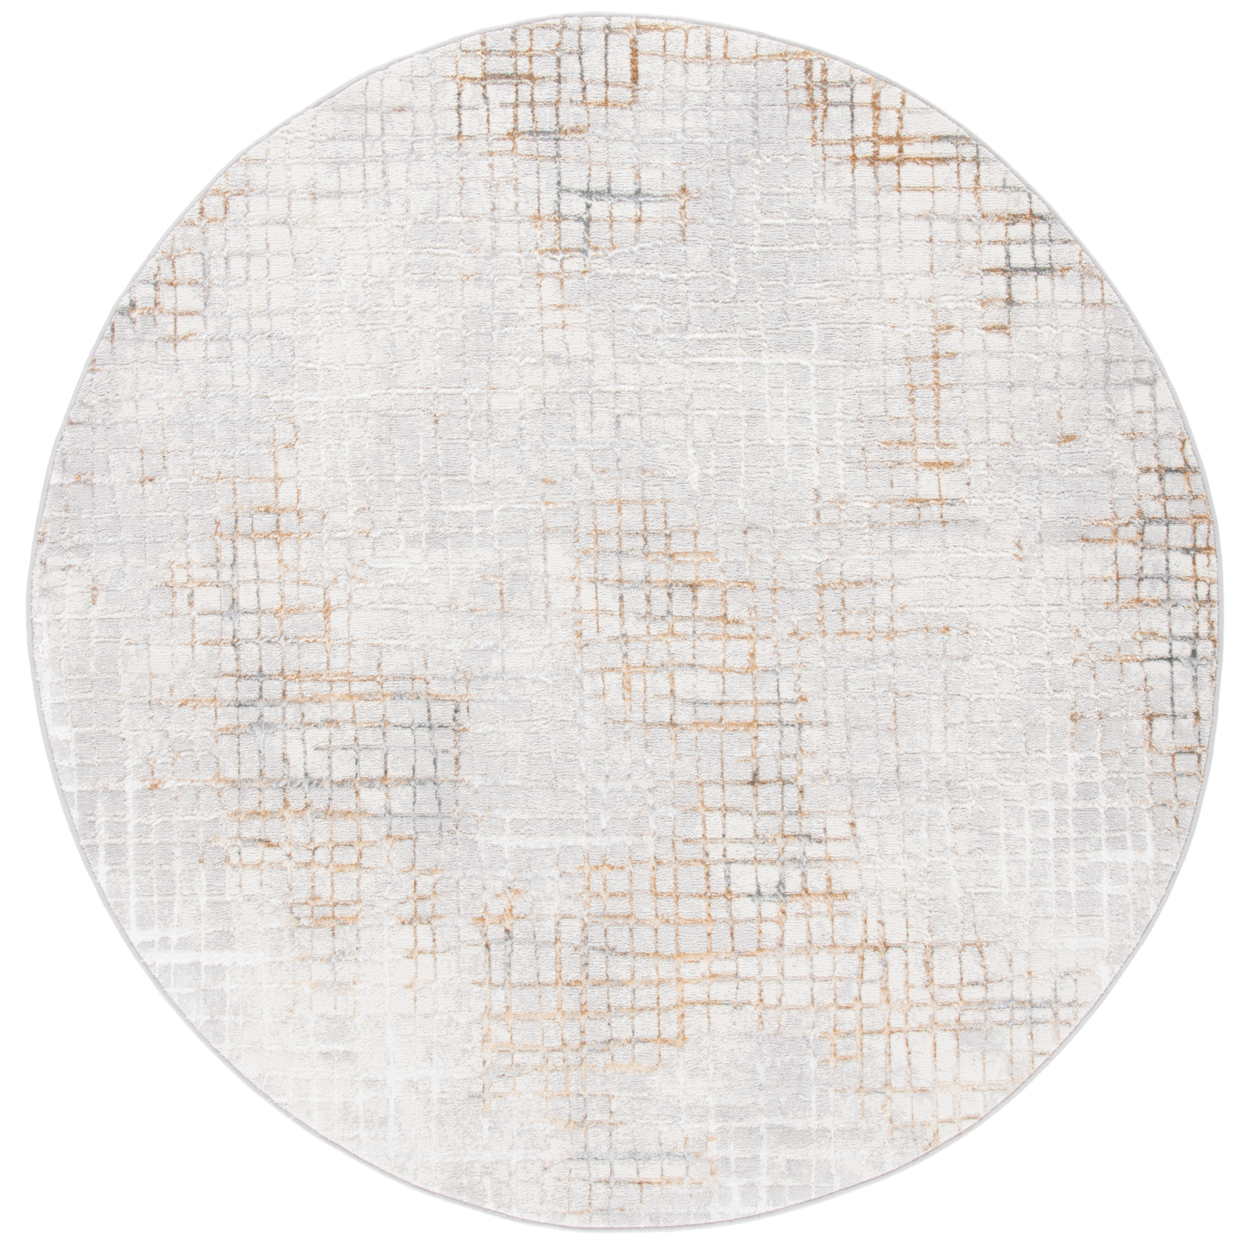 SAFAVIEH Orchard Collection ORC672F Grey / Gold Rug - 3' Round